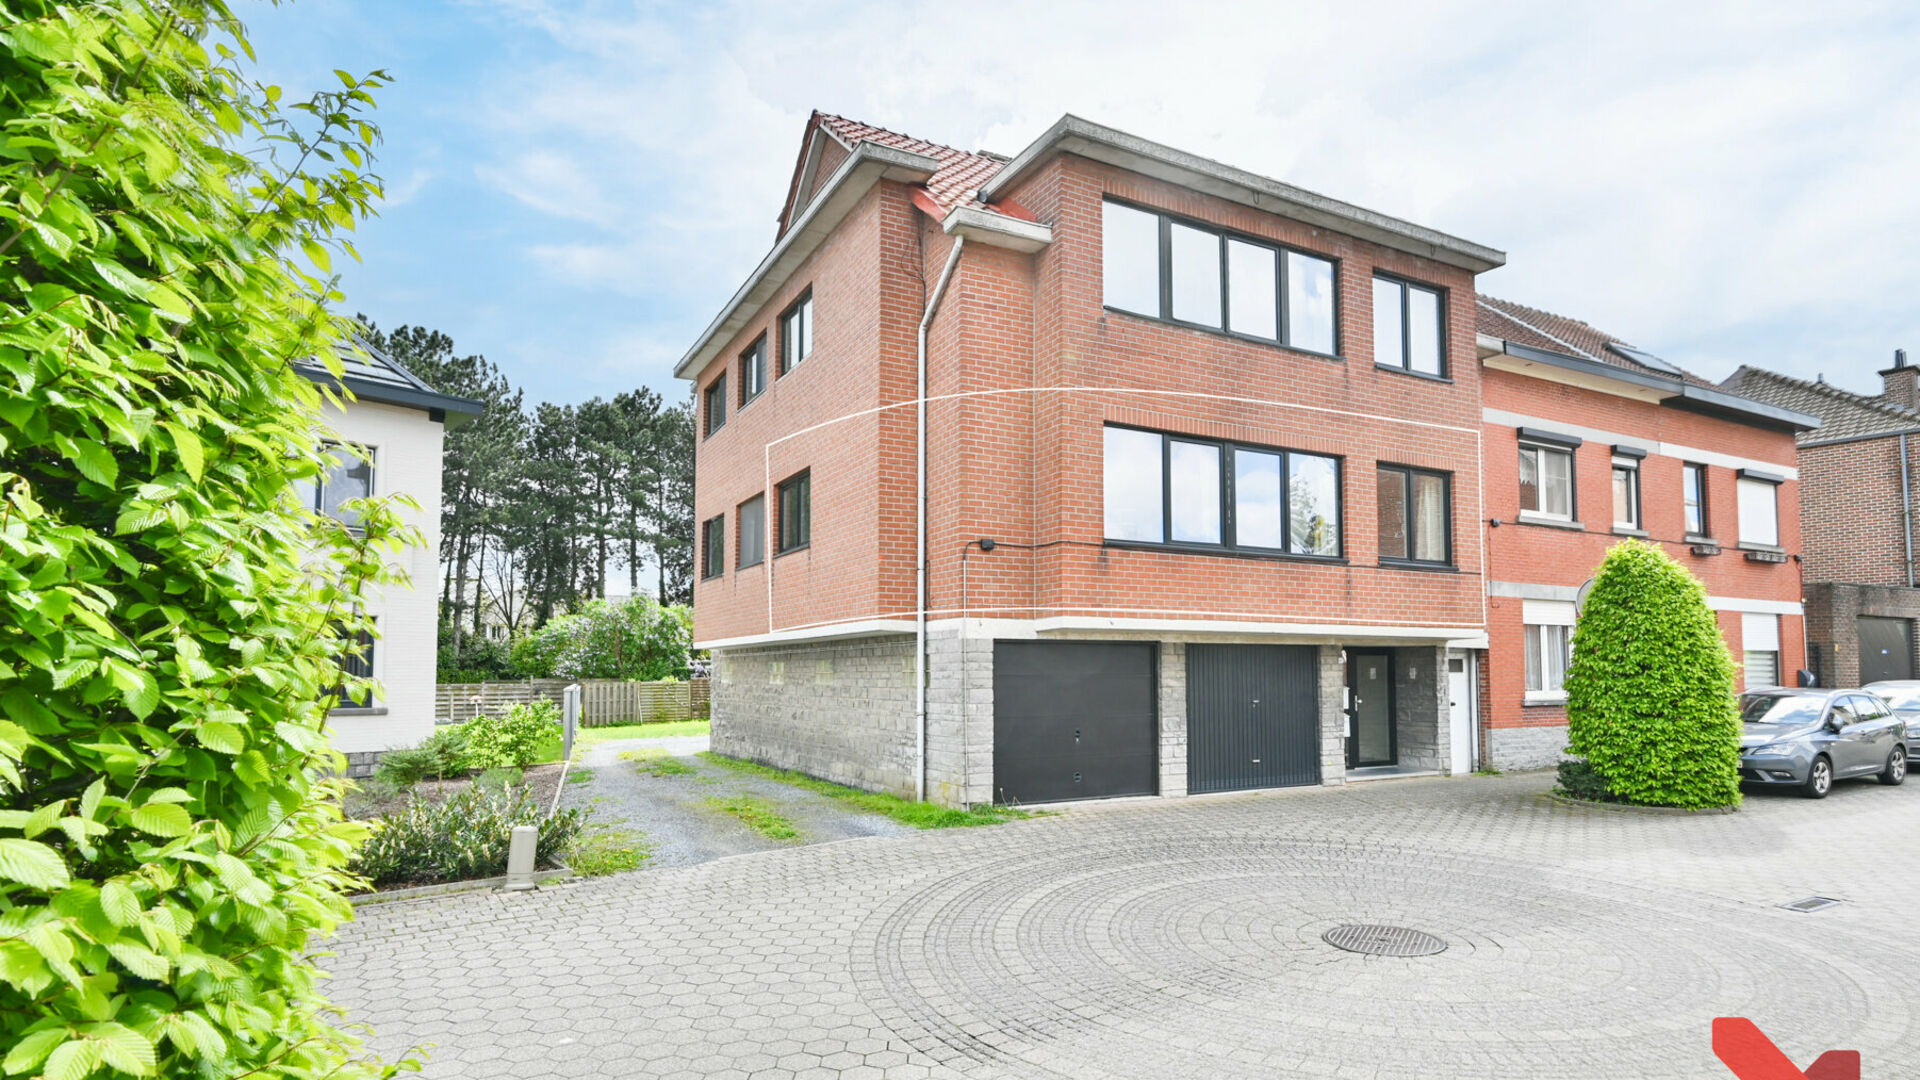 Flat for sale in Herent